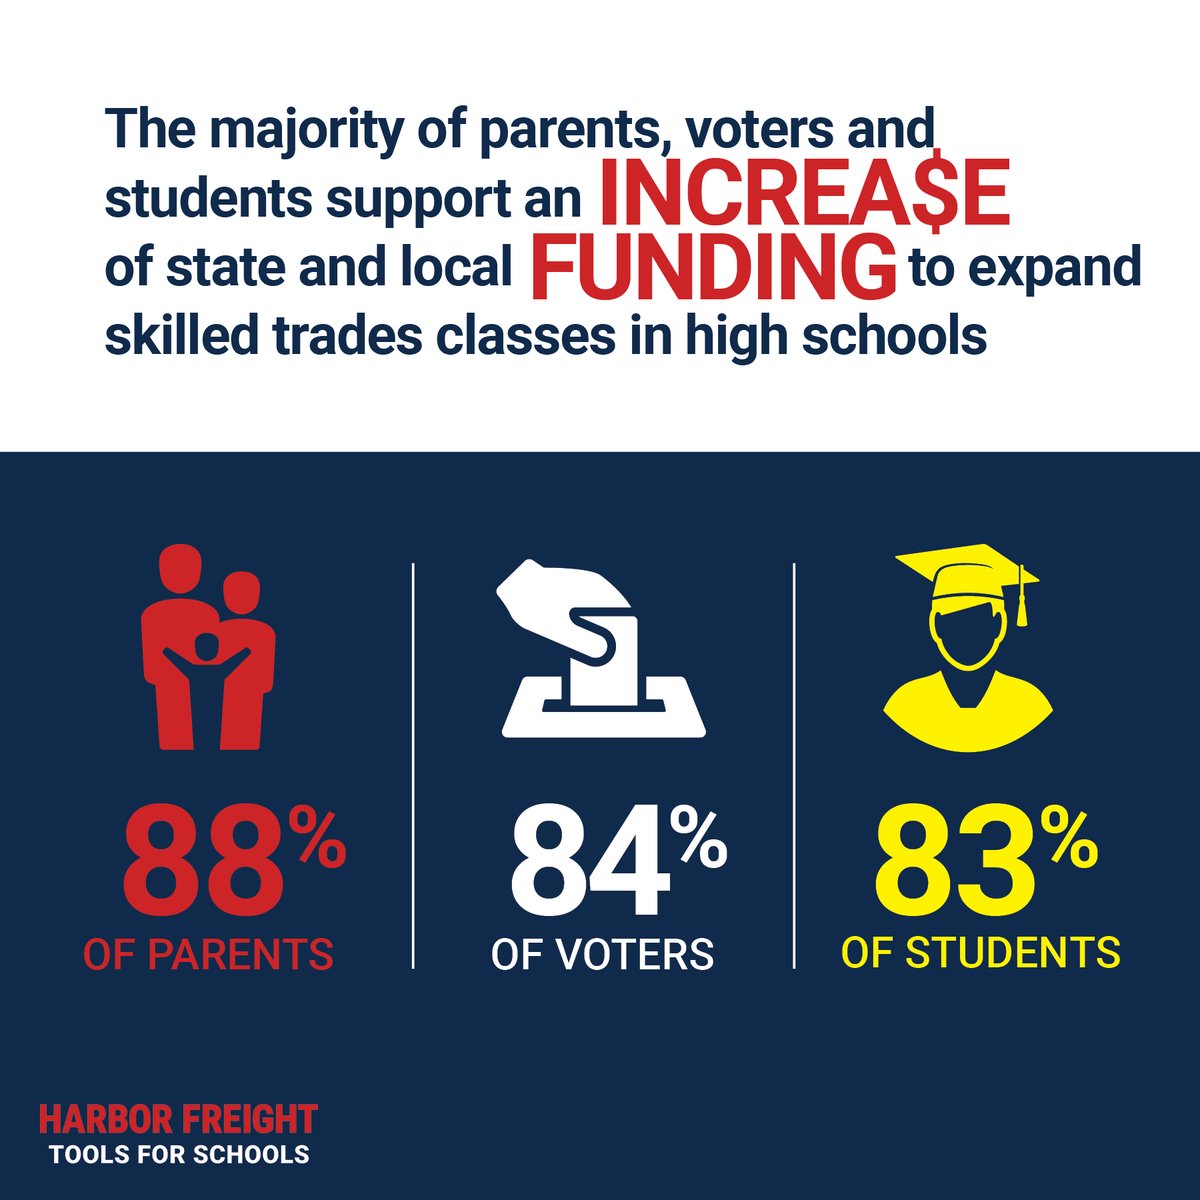 In a new survey, more than 80 percent of voters, parents and students support an increase in state and local funding to expand skilled trades education in Los Angeles High Schools. Learn more here: hftforschools.org/research/la-co… @GPSN_LA @LAUSDSup @LosAngelesCOE @LASchools @PortofLA